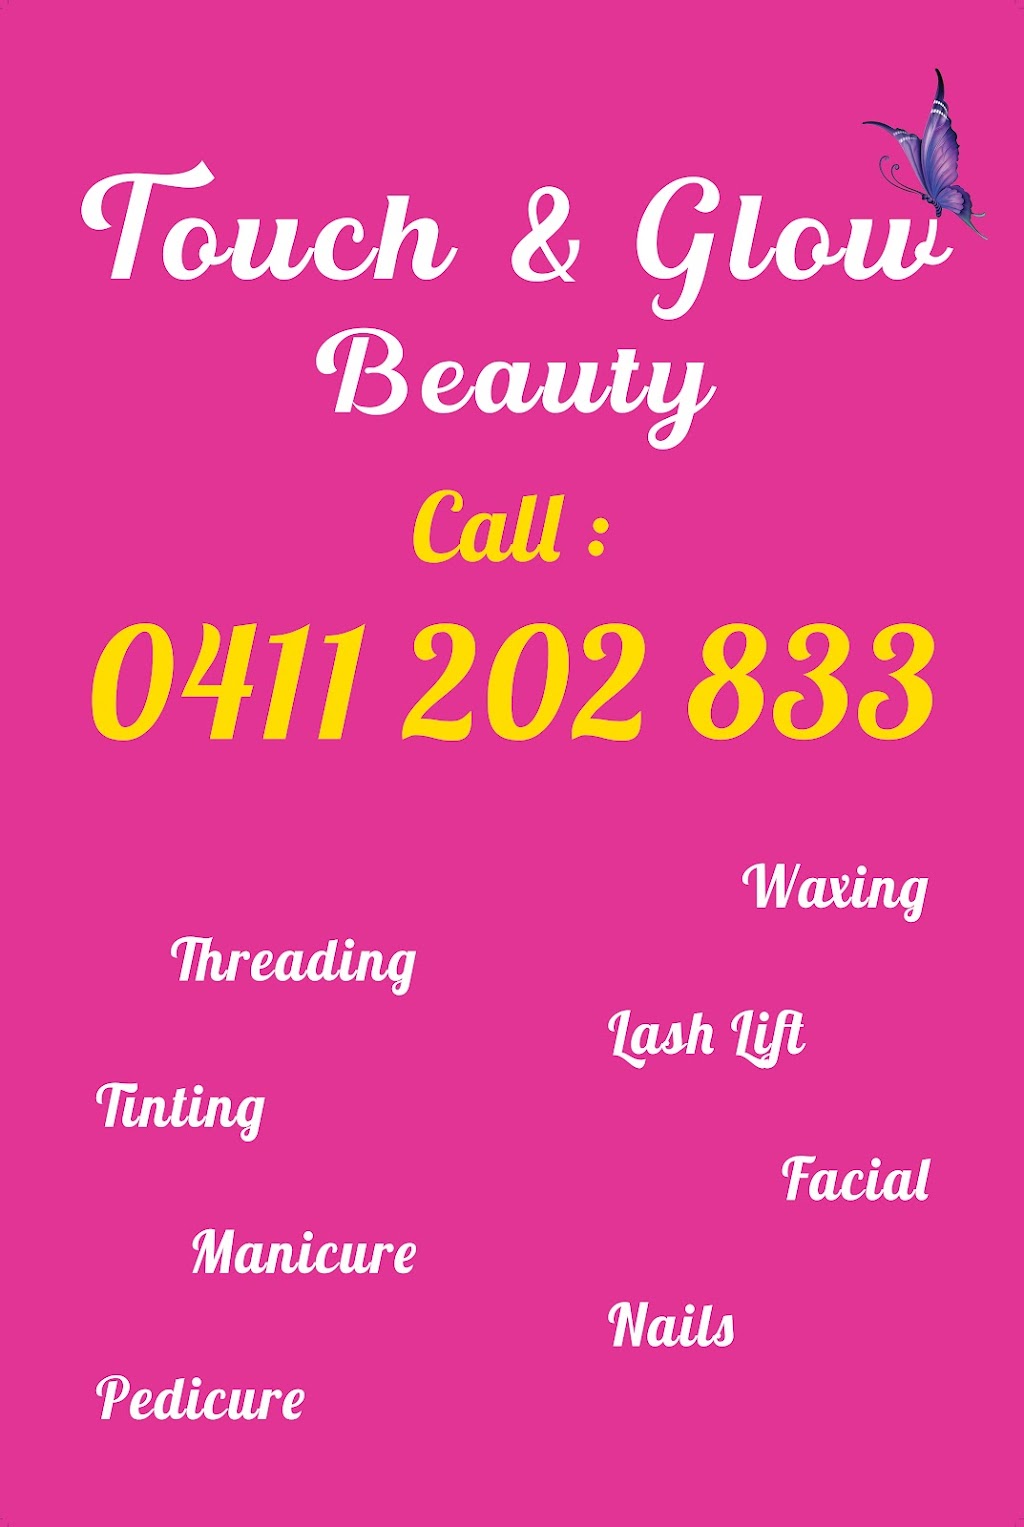 Touch & Glow Beauty | Shop 2/ 62 Scarborough St, Corner of, Chuter Ave, Monterey NSW 2217, Australia | Phone: 0411 202 833